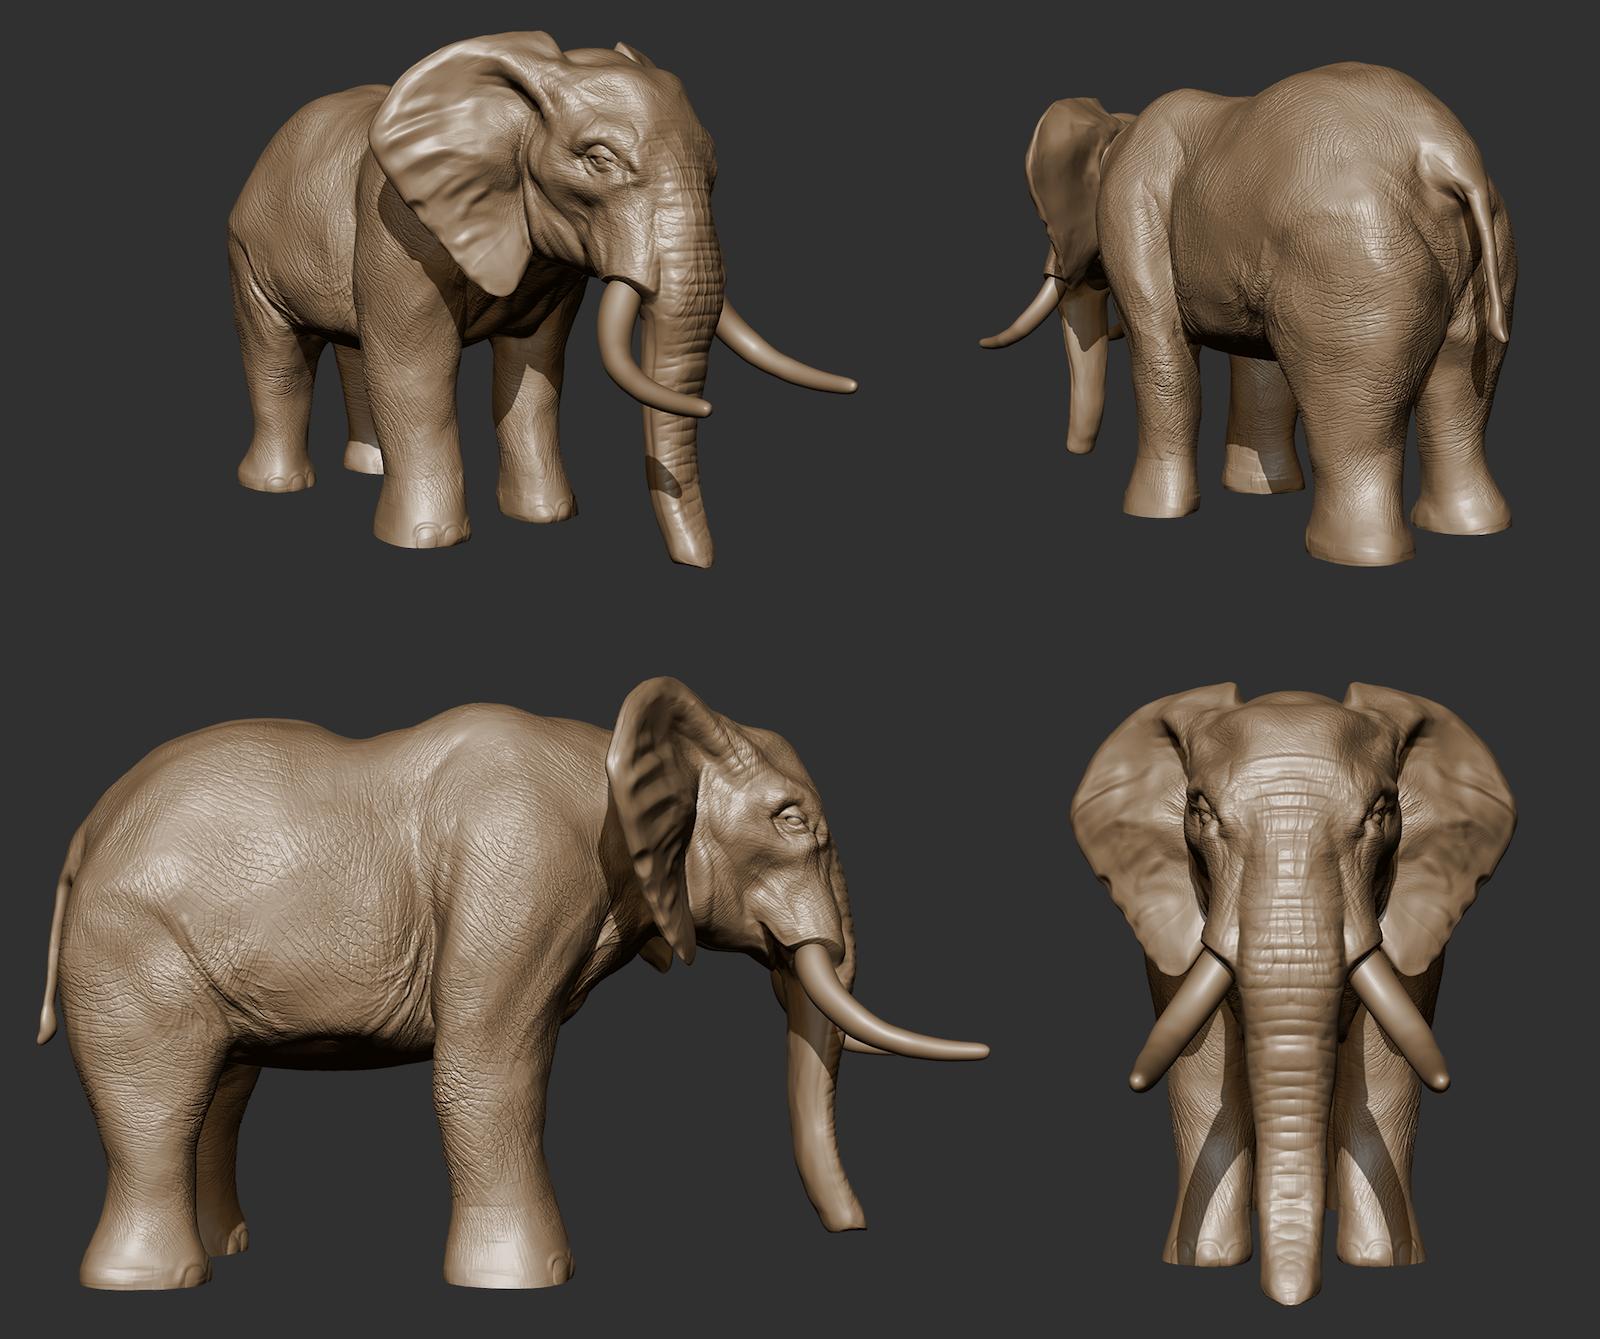 3D sculpted elephant from multiple points of view by Mariana Rios